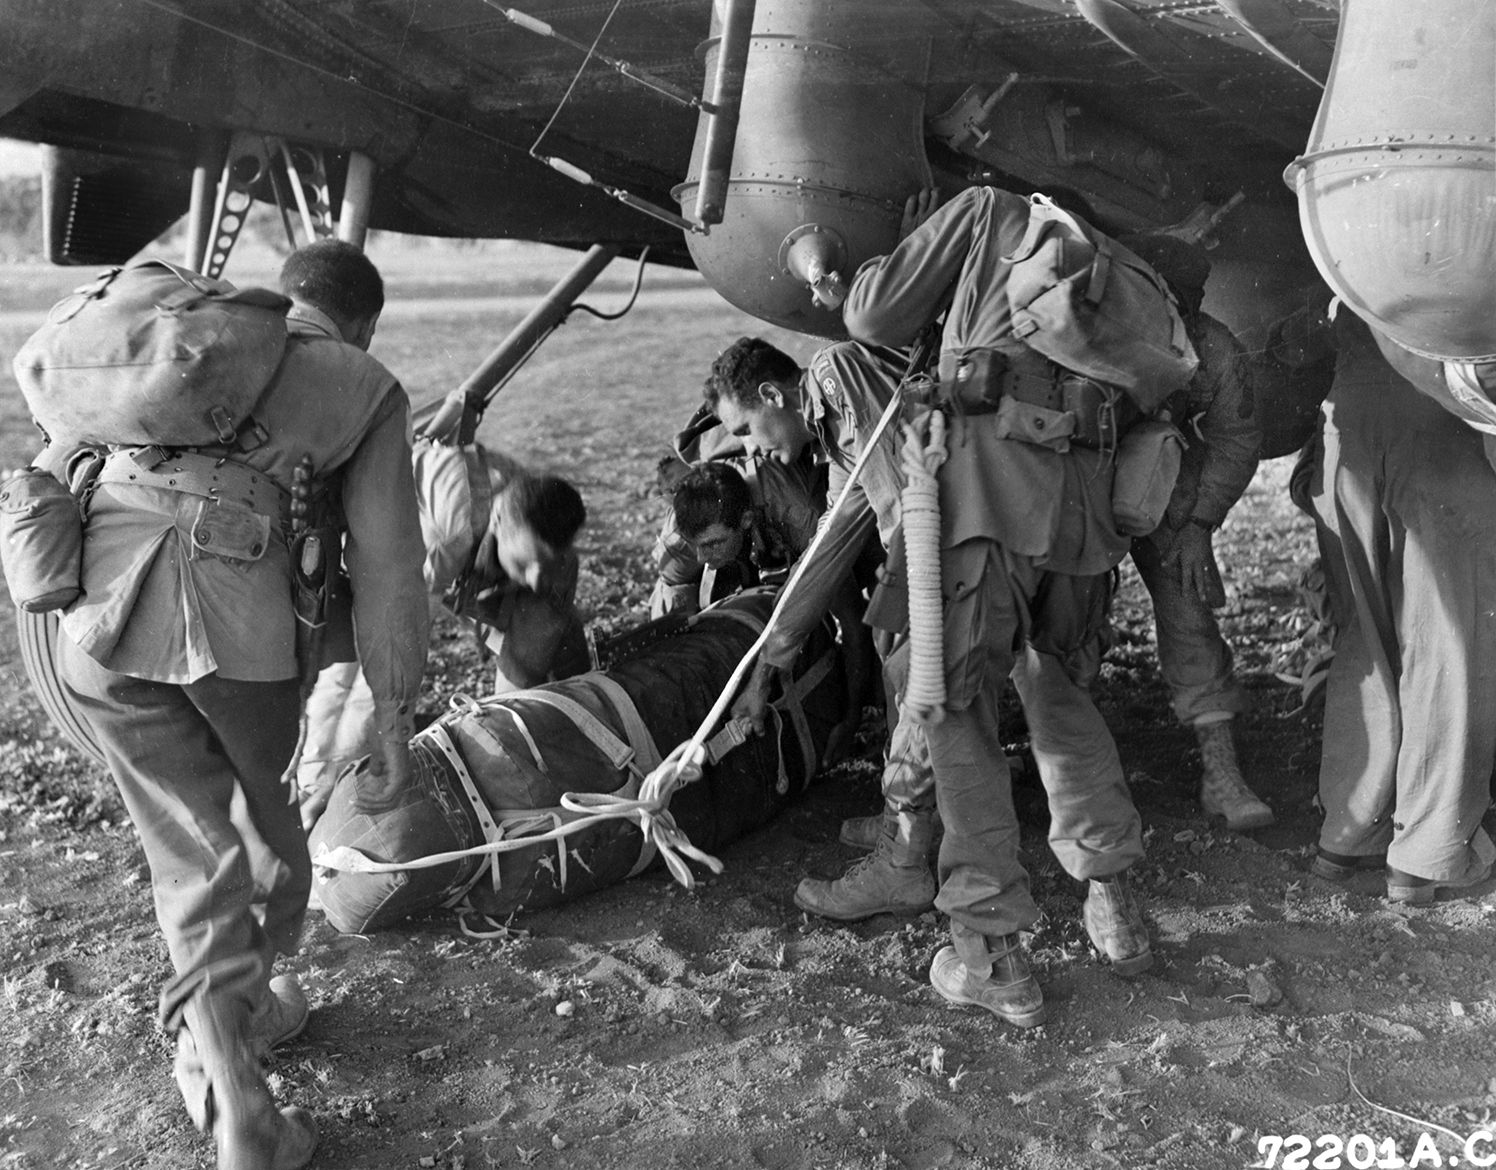 Paratroopers of the 82nd Airborne Division collect their gear and load aboard aircraft in preparation for their jump into Italy near Salerno on September 13-14, 1943. The airborne troops were inserted to reinforce the Allied Fifth Army invasion of the Italian mainland. 